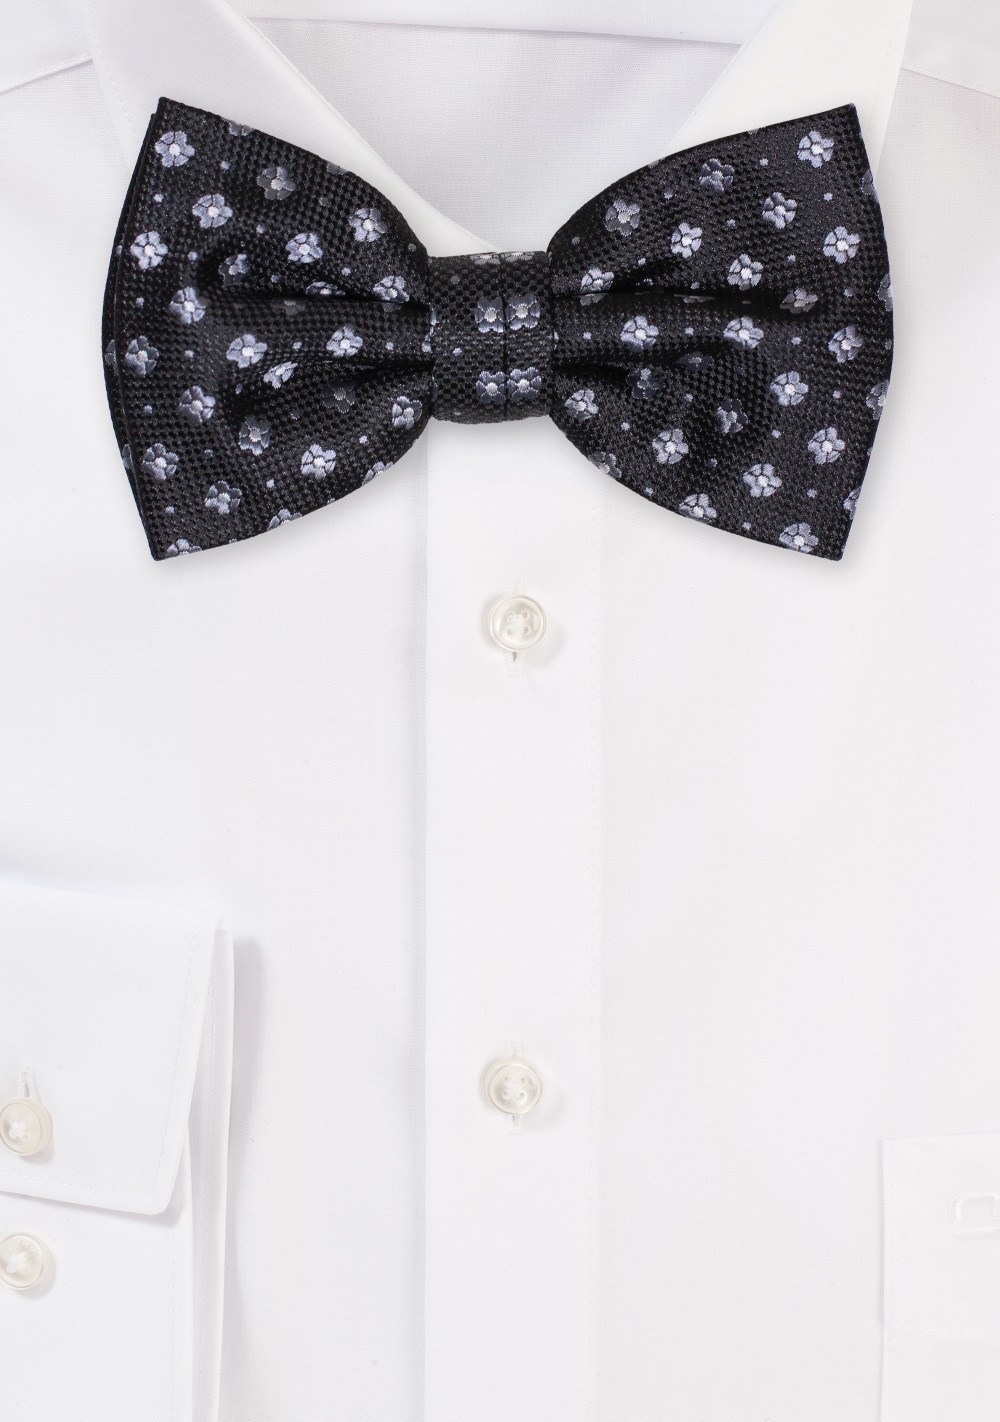 Woven Floral Bowtie in Black and Gray